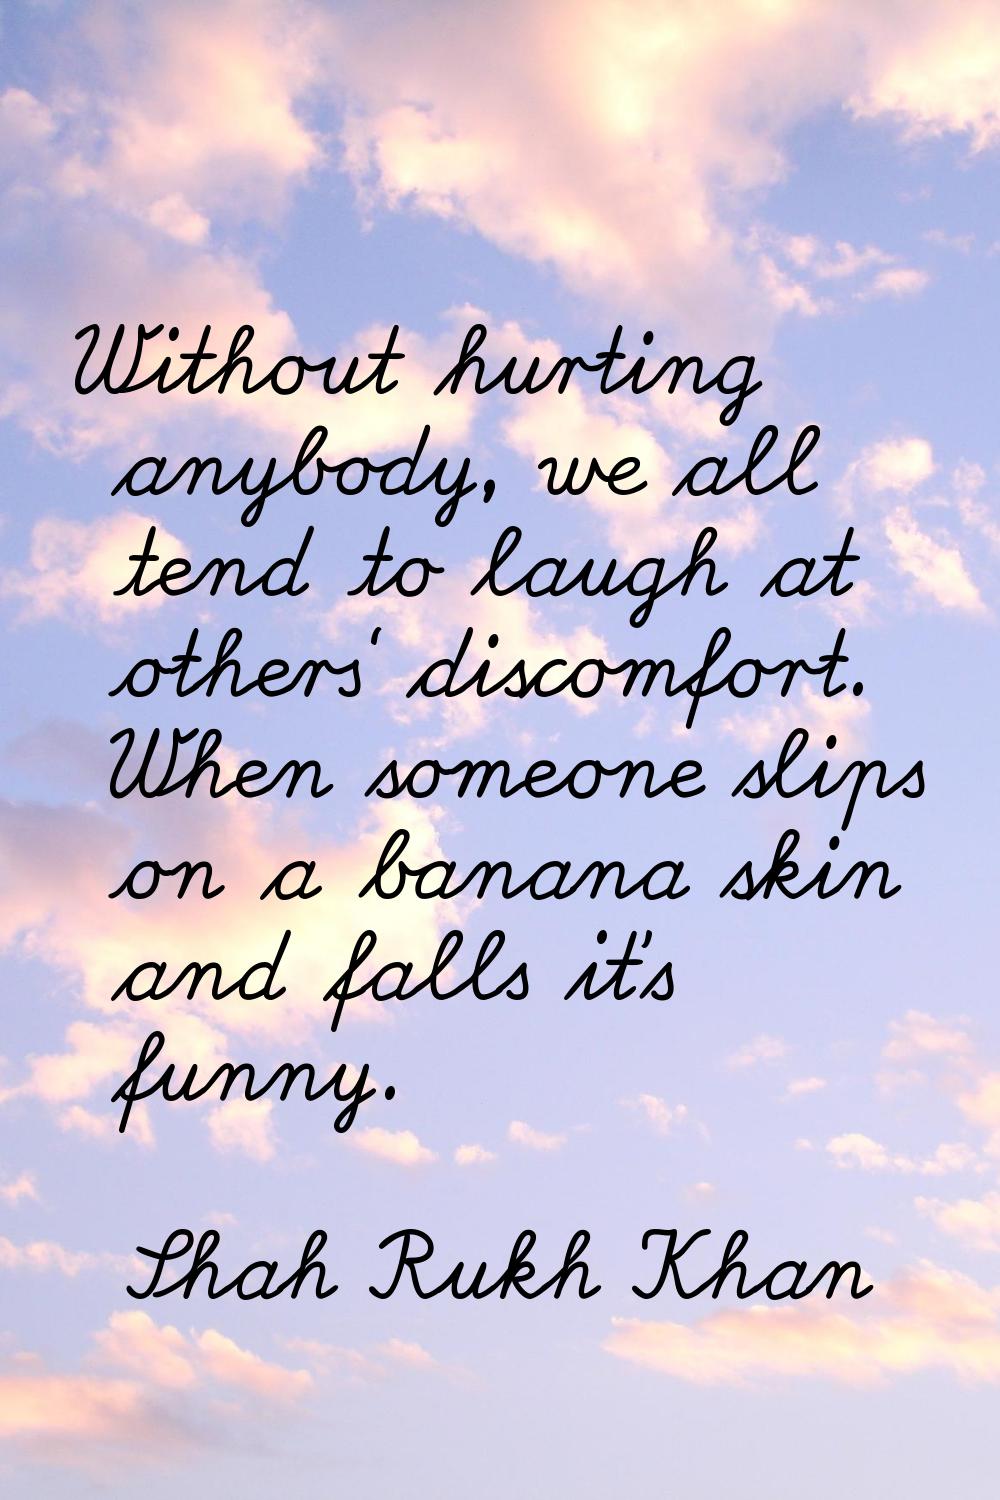 Without hurting anybody, we all tend to laugh at others' discomfort. When someone slips on a banana